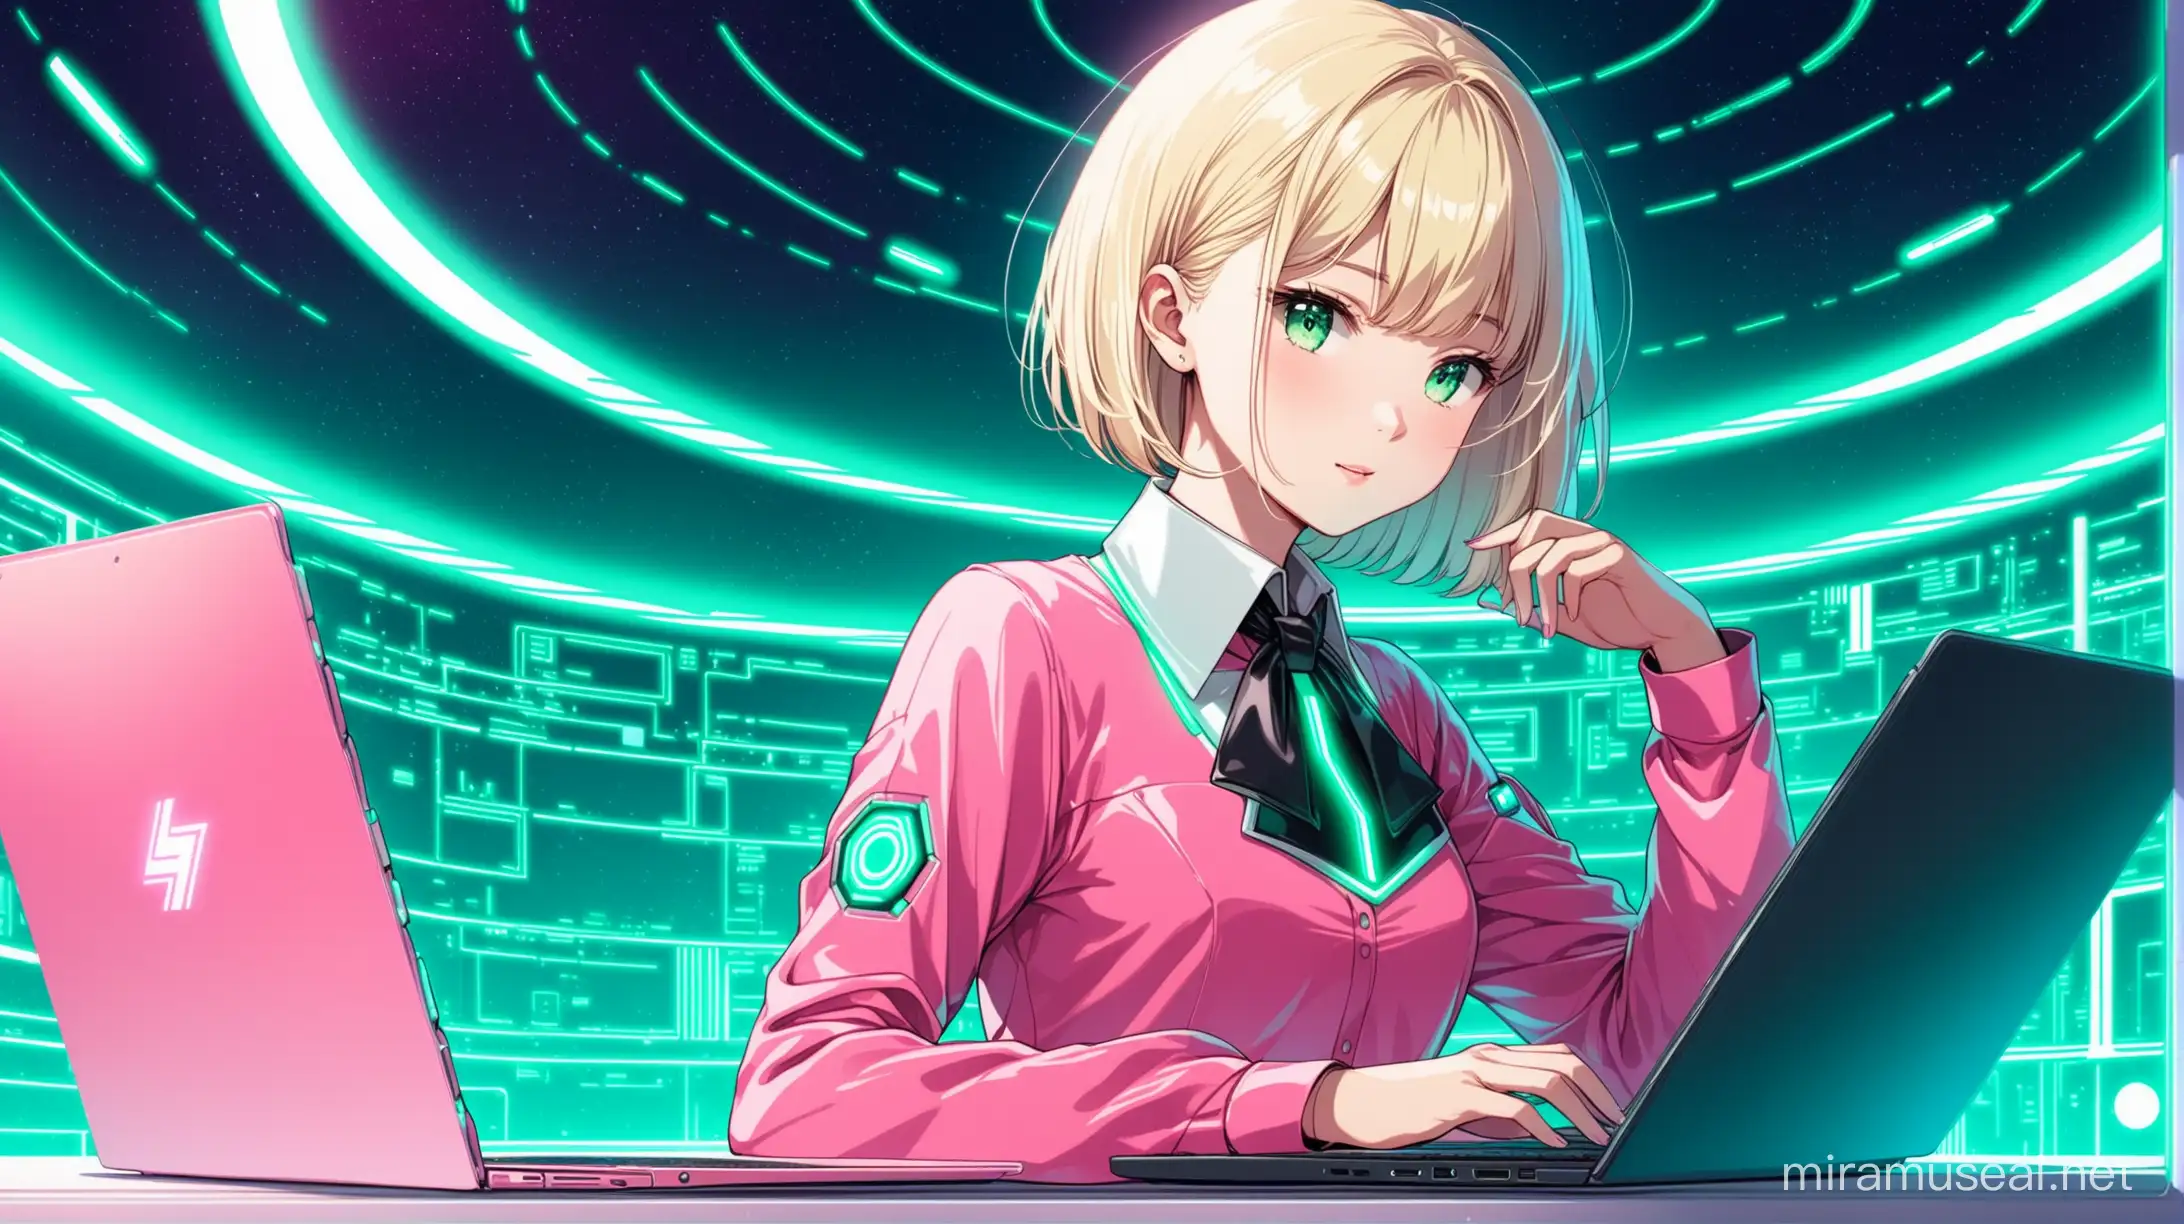 Platinum Blonde Girl Working on Laptop in Futuristic MintColored Environment